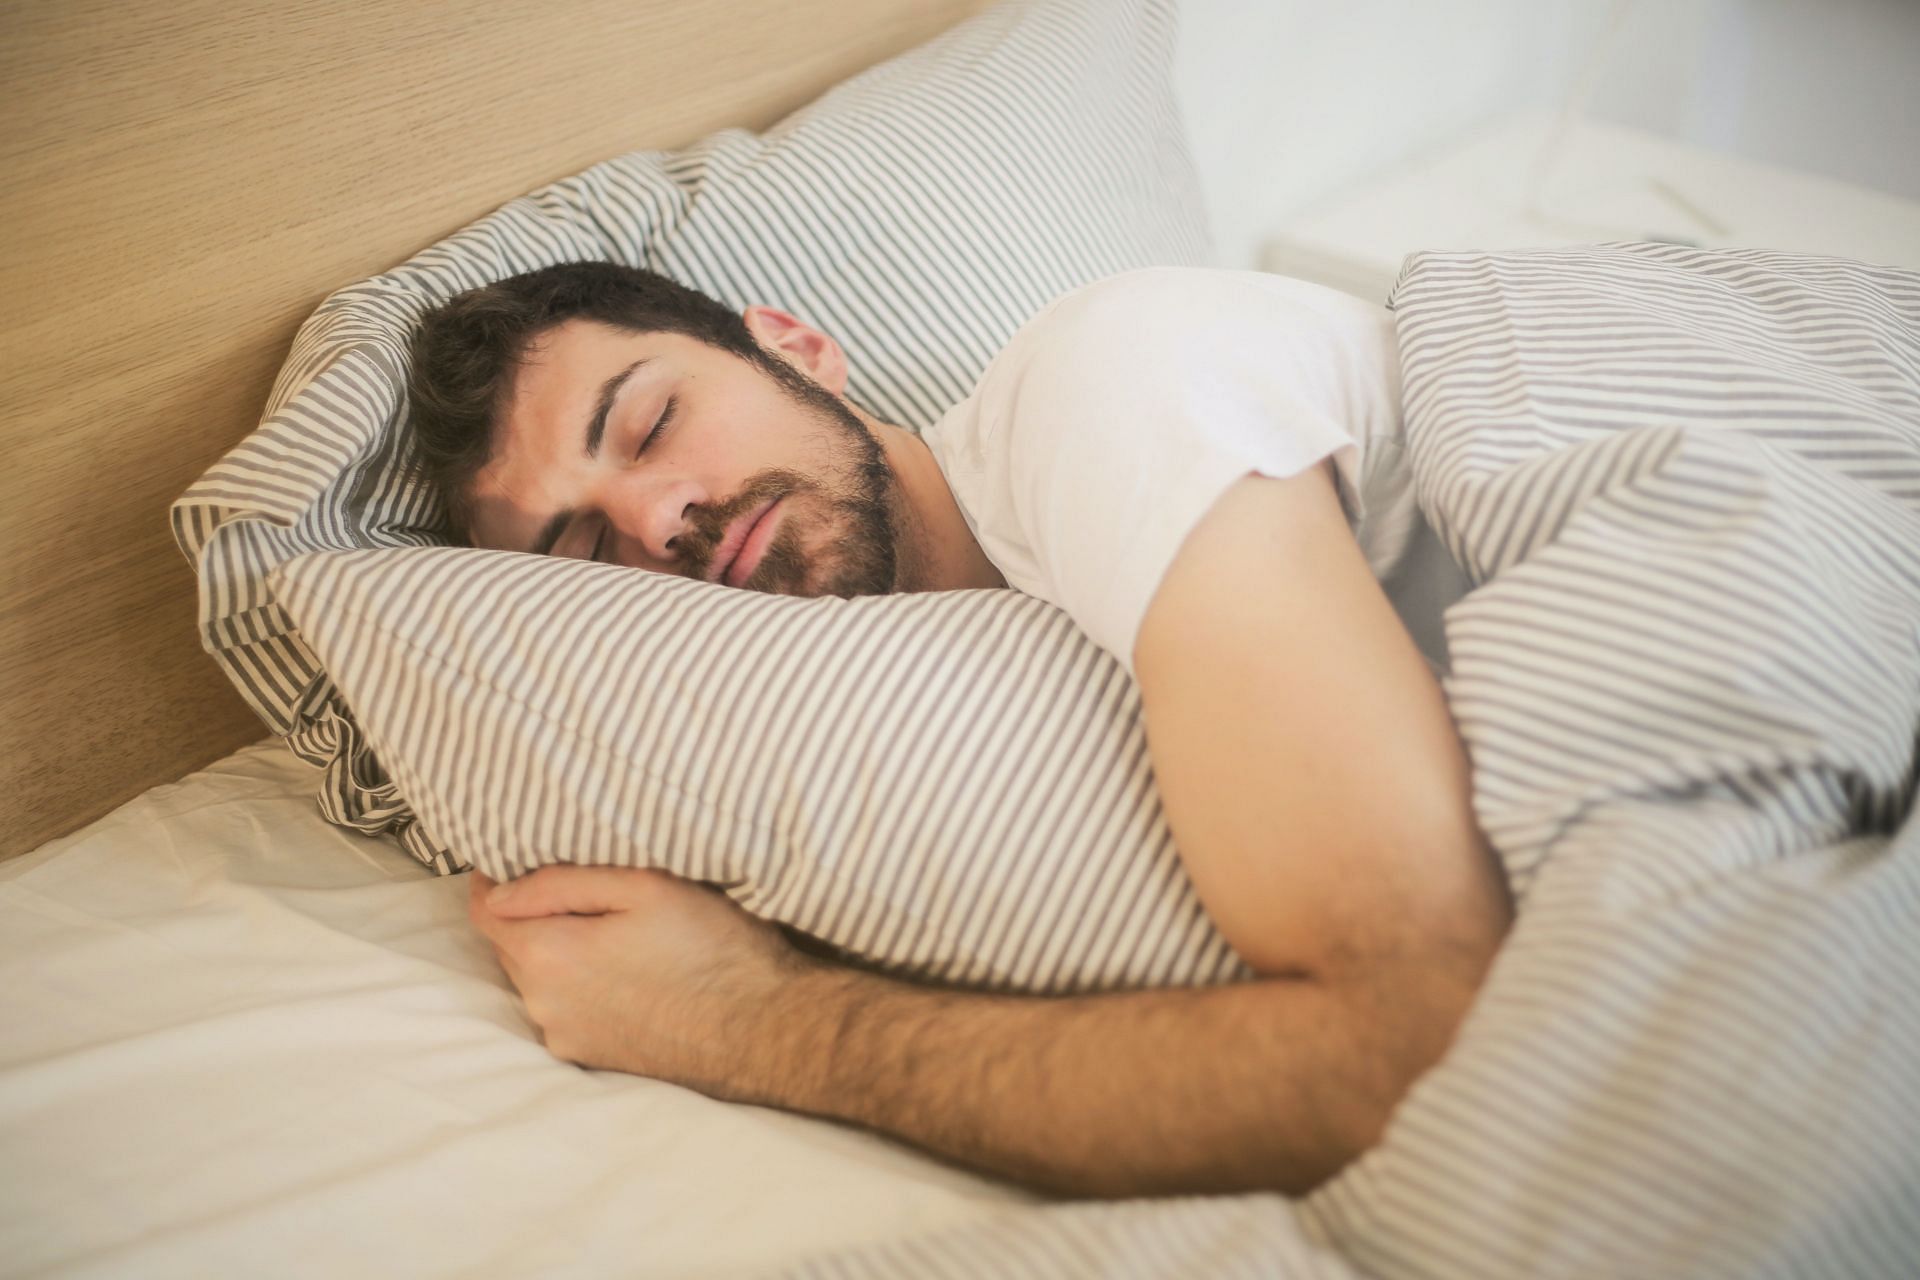 Getting enough sleep is one way to combat anemia. (Image via Pexels/Andrea Piacquadio)